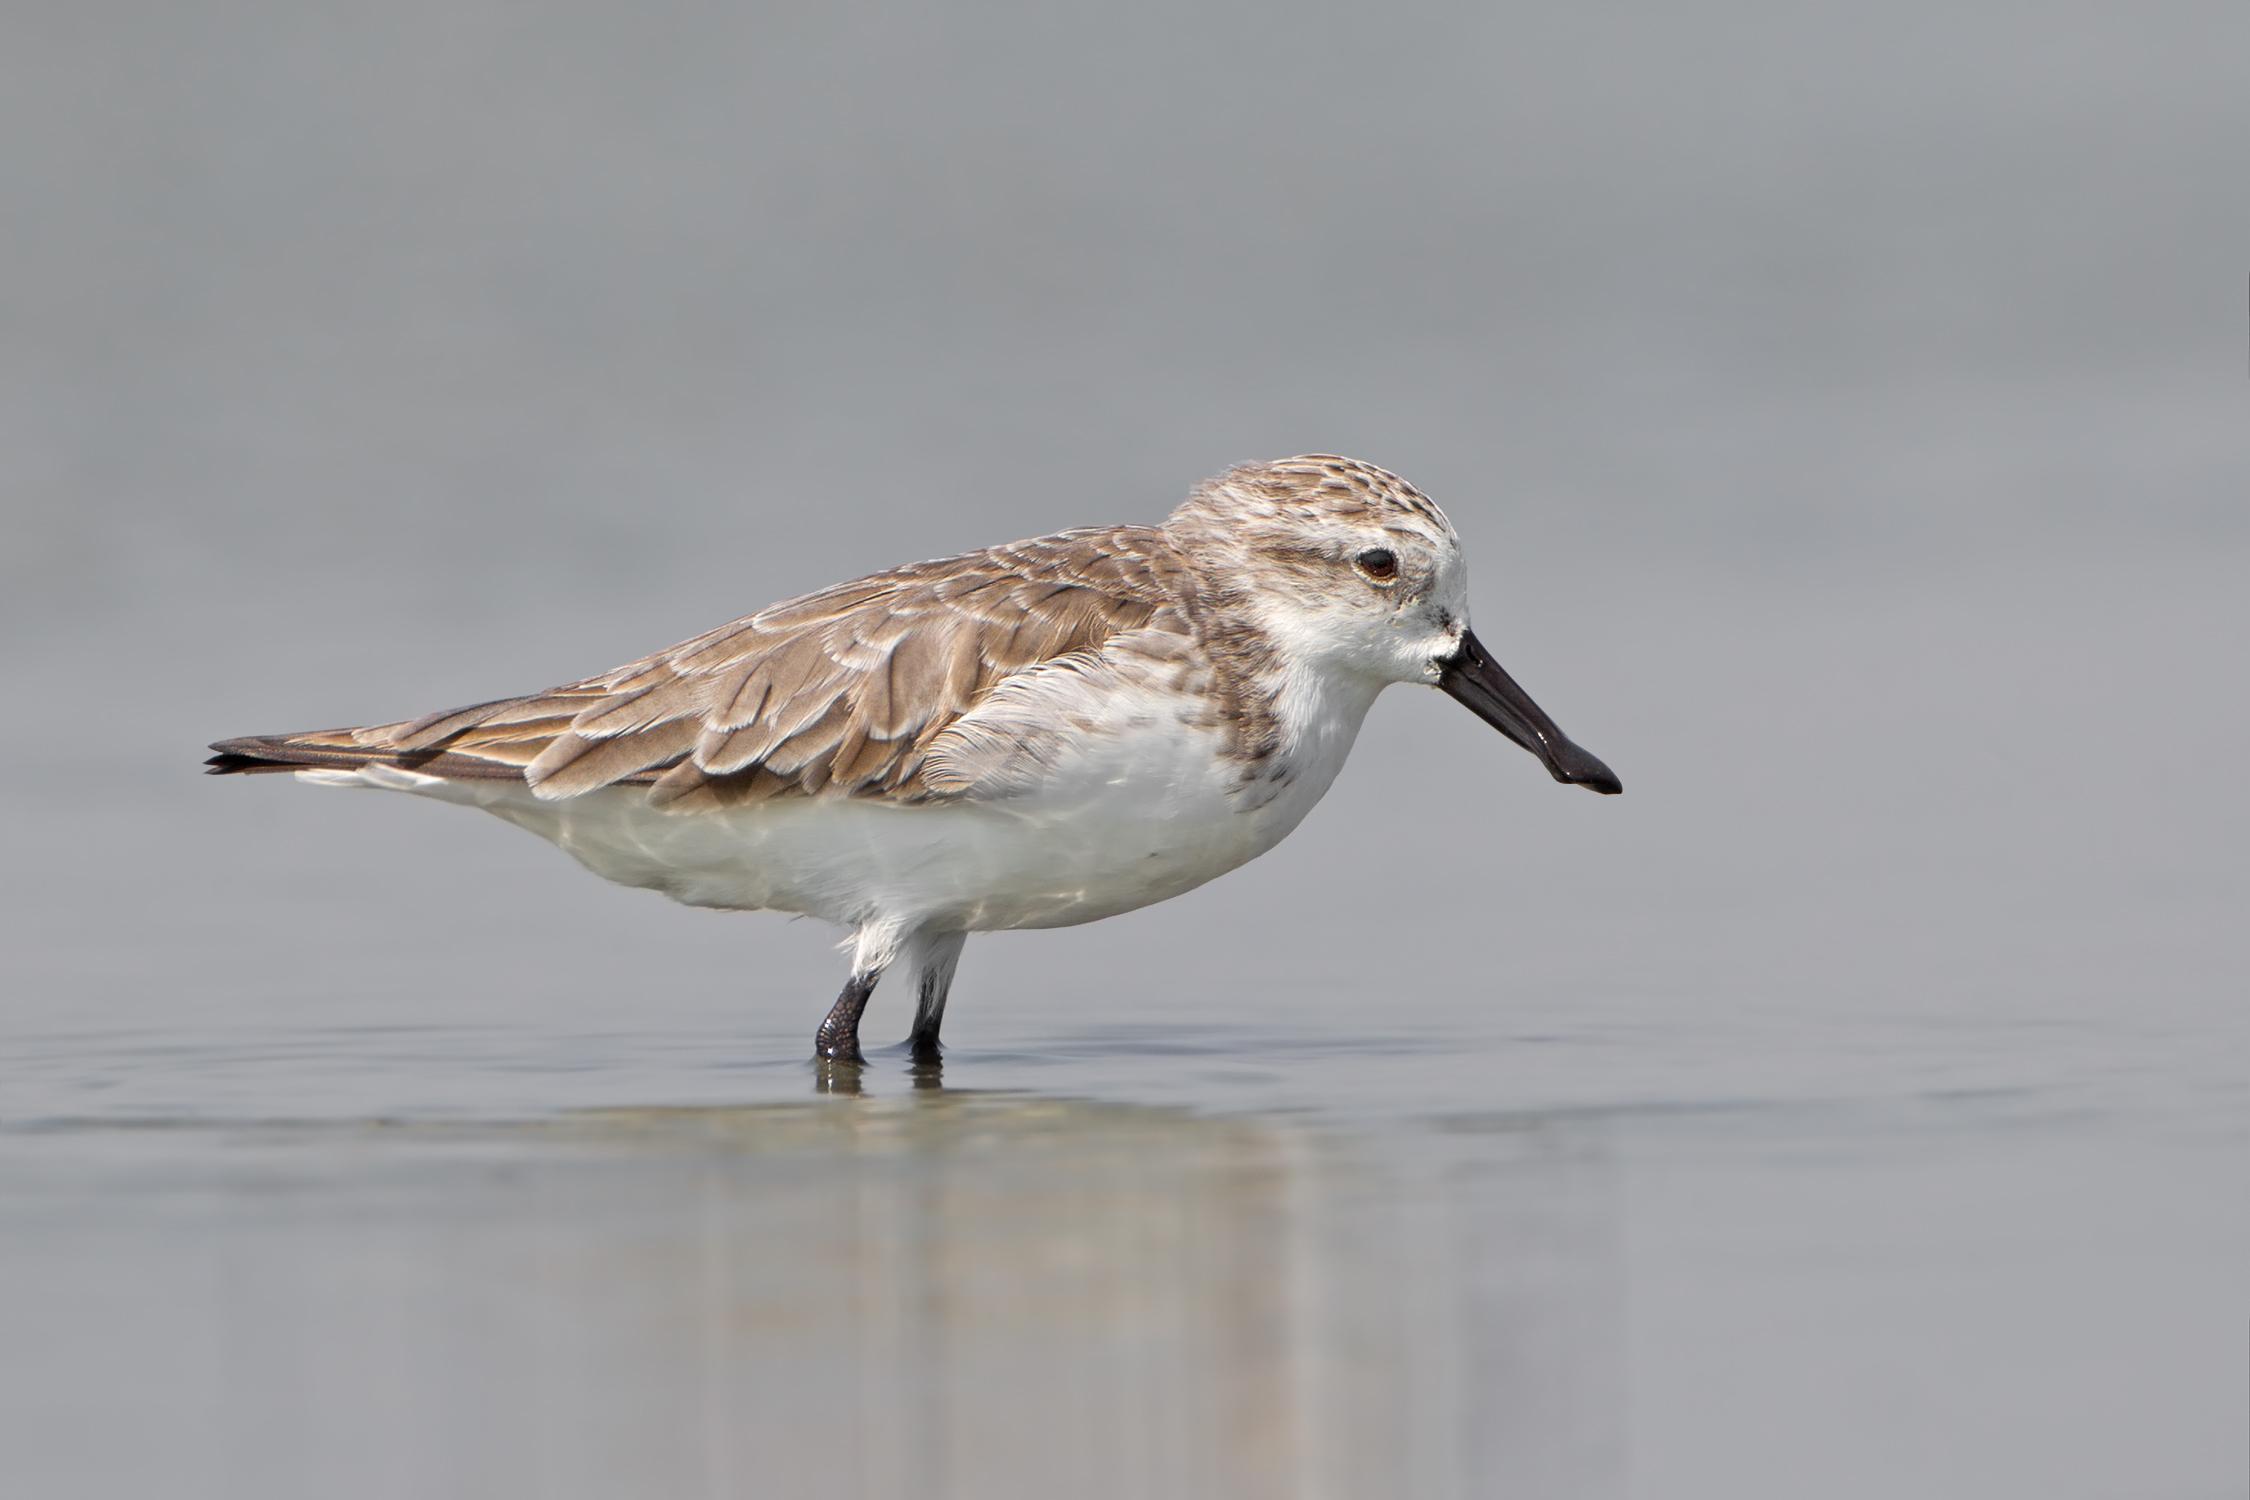 Spoon Billed Sandpiper Photo And Wallpaper. Collection